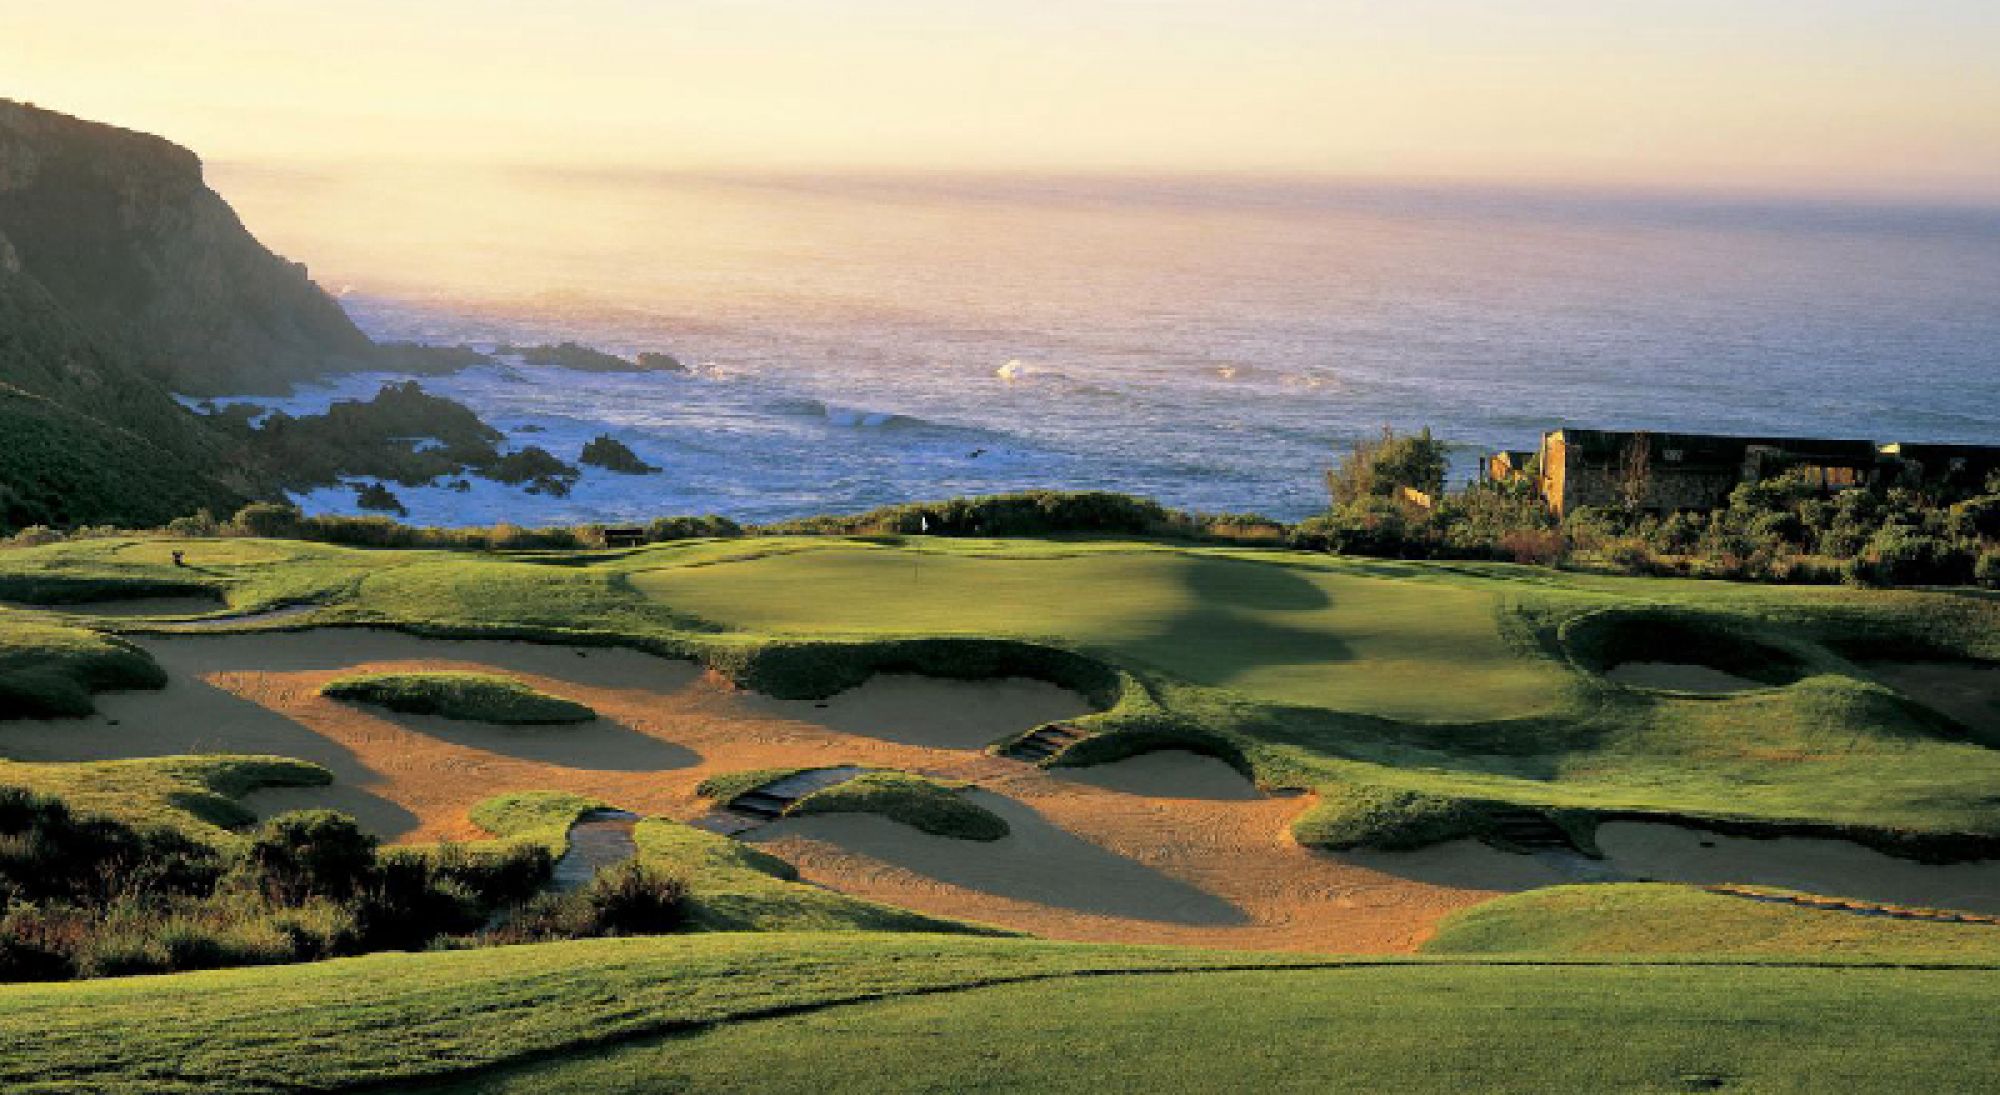 View Pezula Championship Course's picturesque golf course in astounding South Africa.